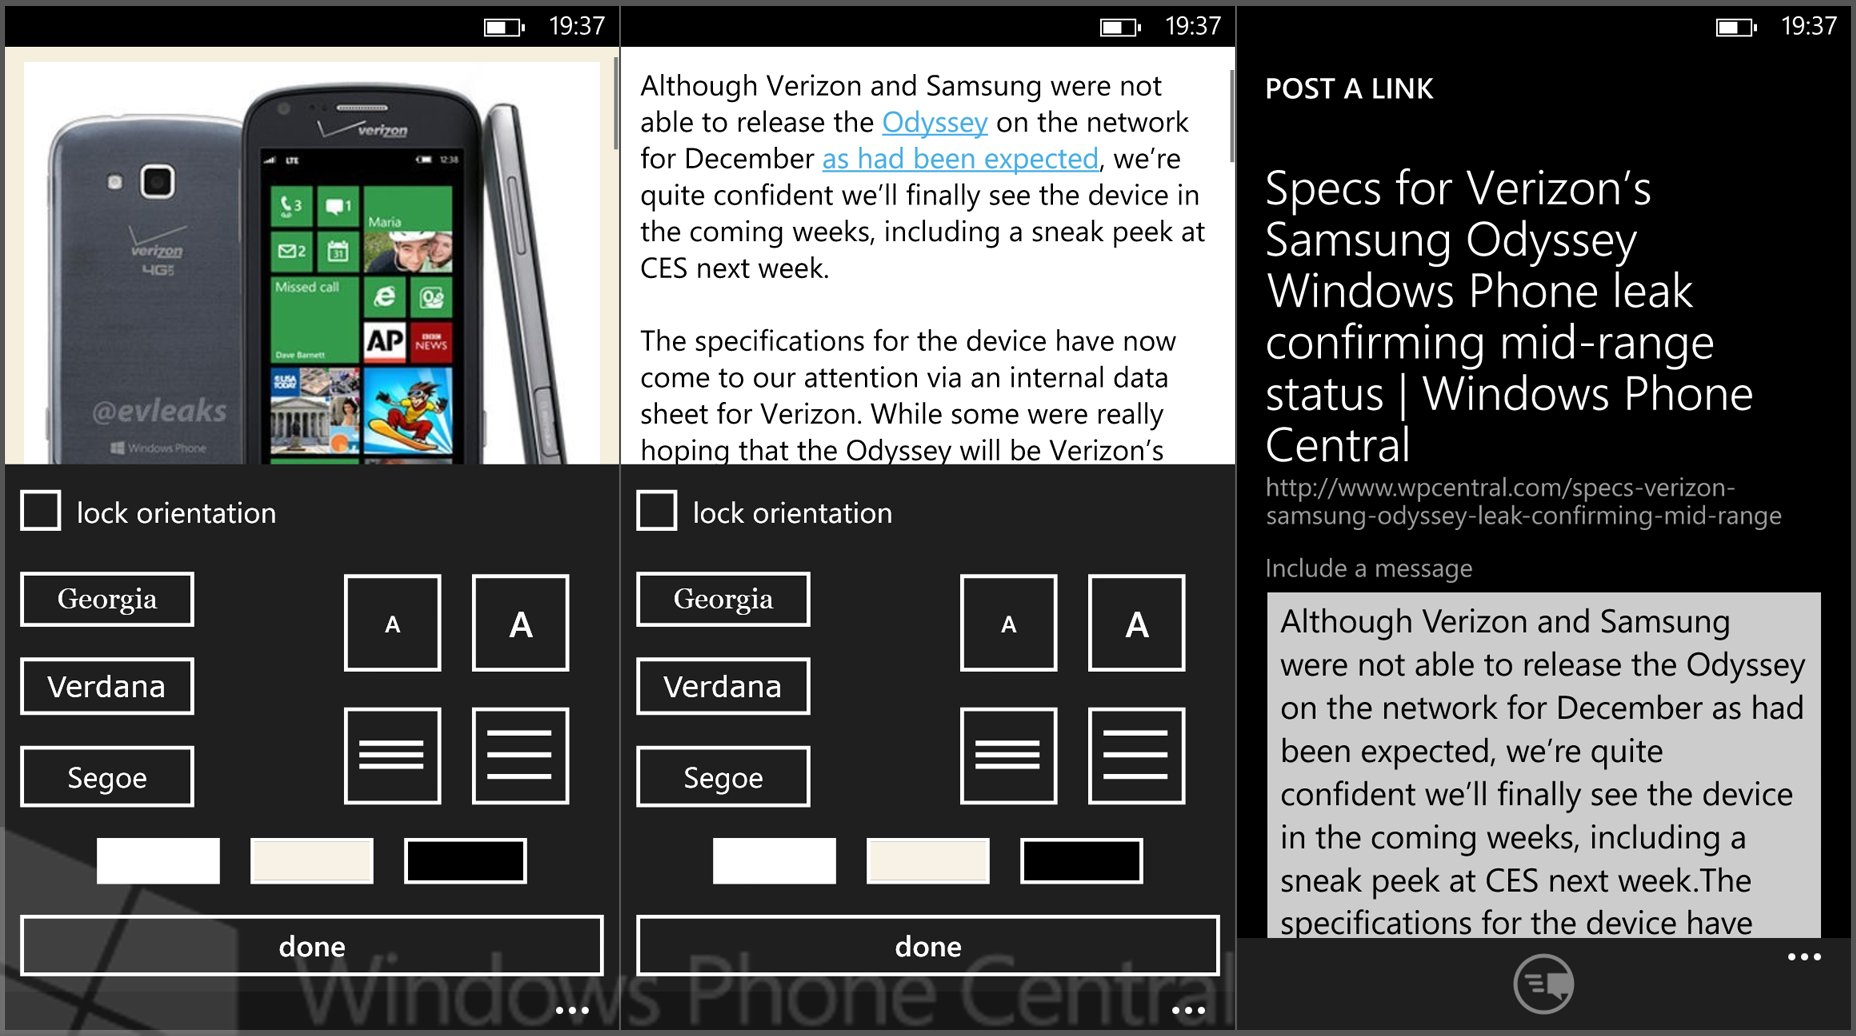 screens Wp8 1 wpcentral instapaper